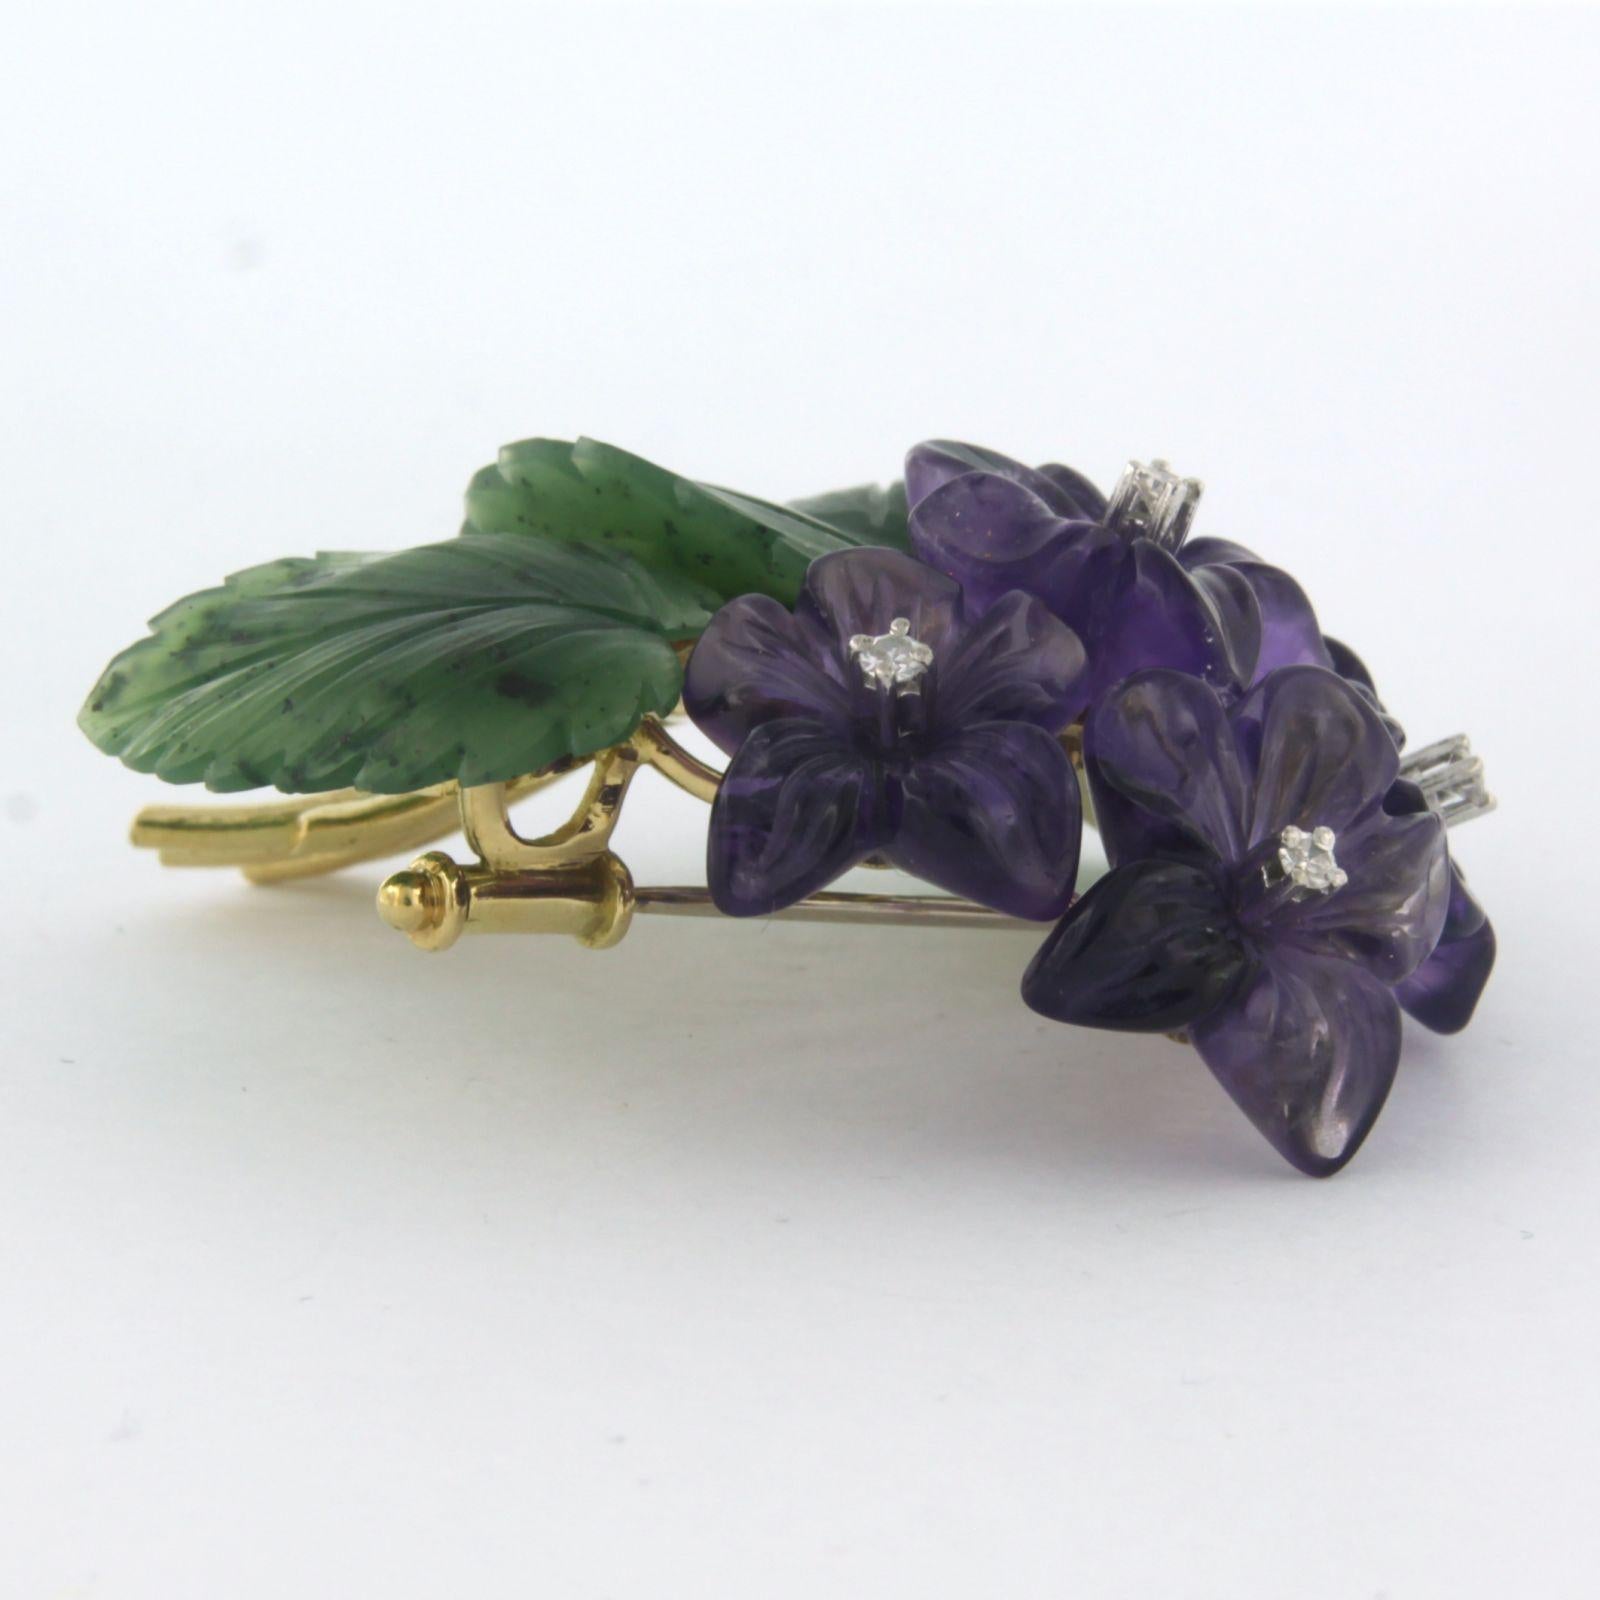 18k yellow gold brooch in the shape of a bouquet with amethyst, jade and single cut diamond. 0.03ct - F/G - VS/SI - dim. 4.6cm x 4.2cm

detailed description

the size of the brooch is 4.2 cm wide by 4.6 cm high and 1.5 cm deep

weight 18.7